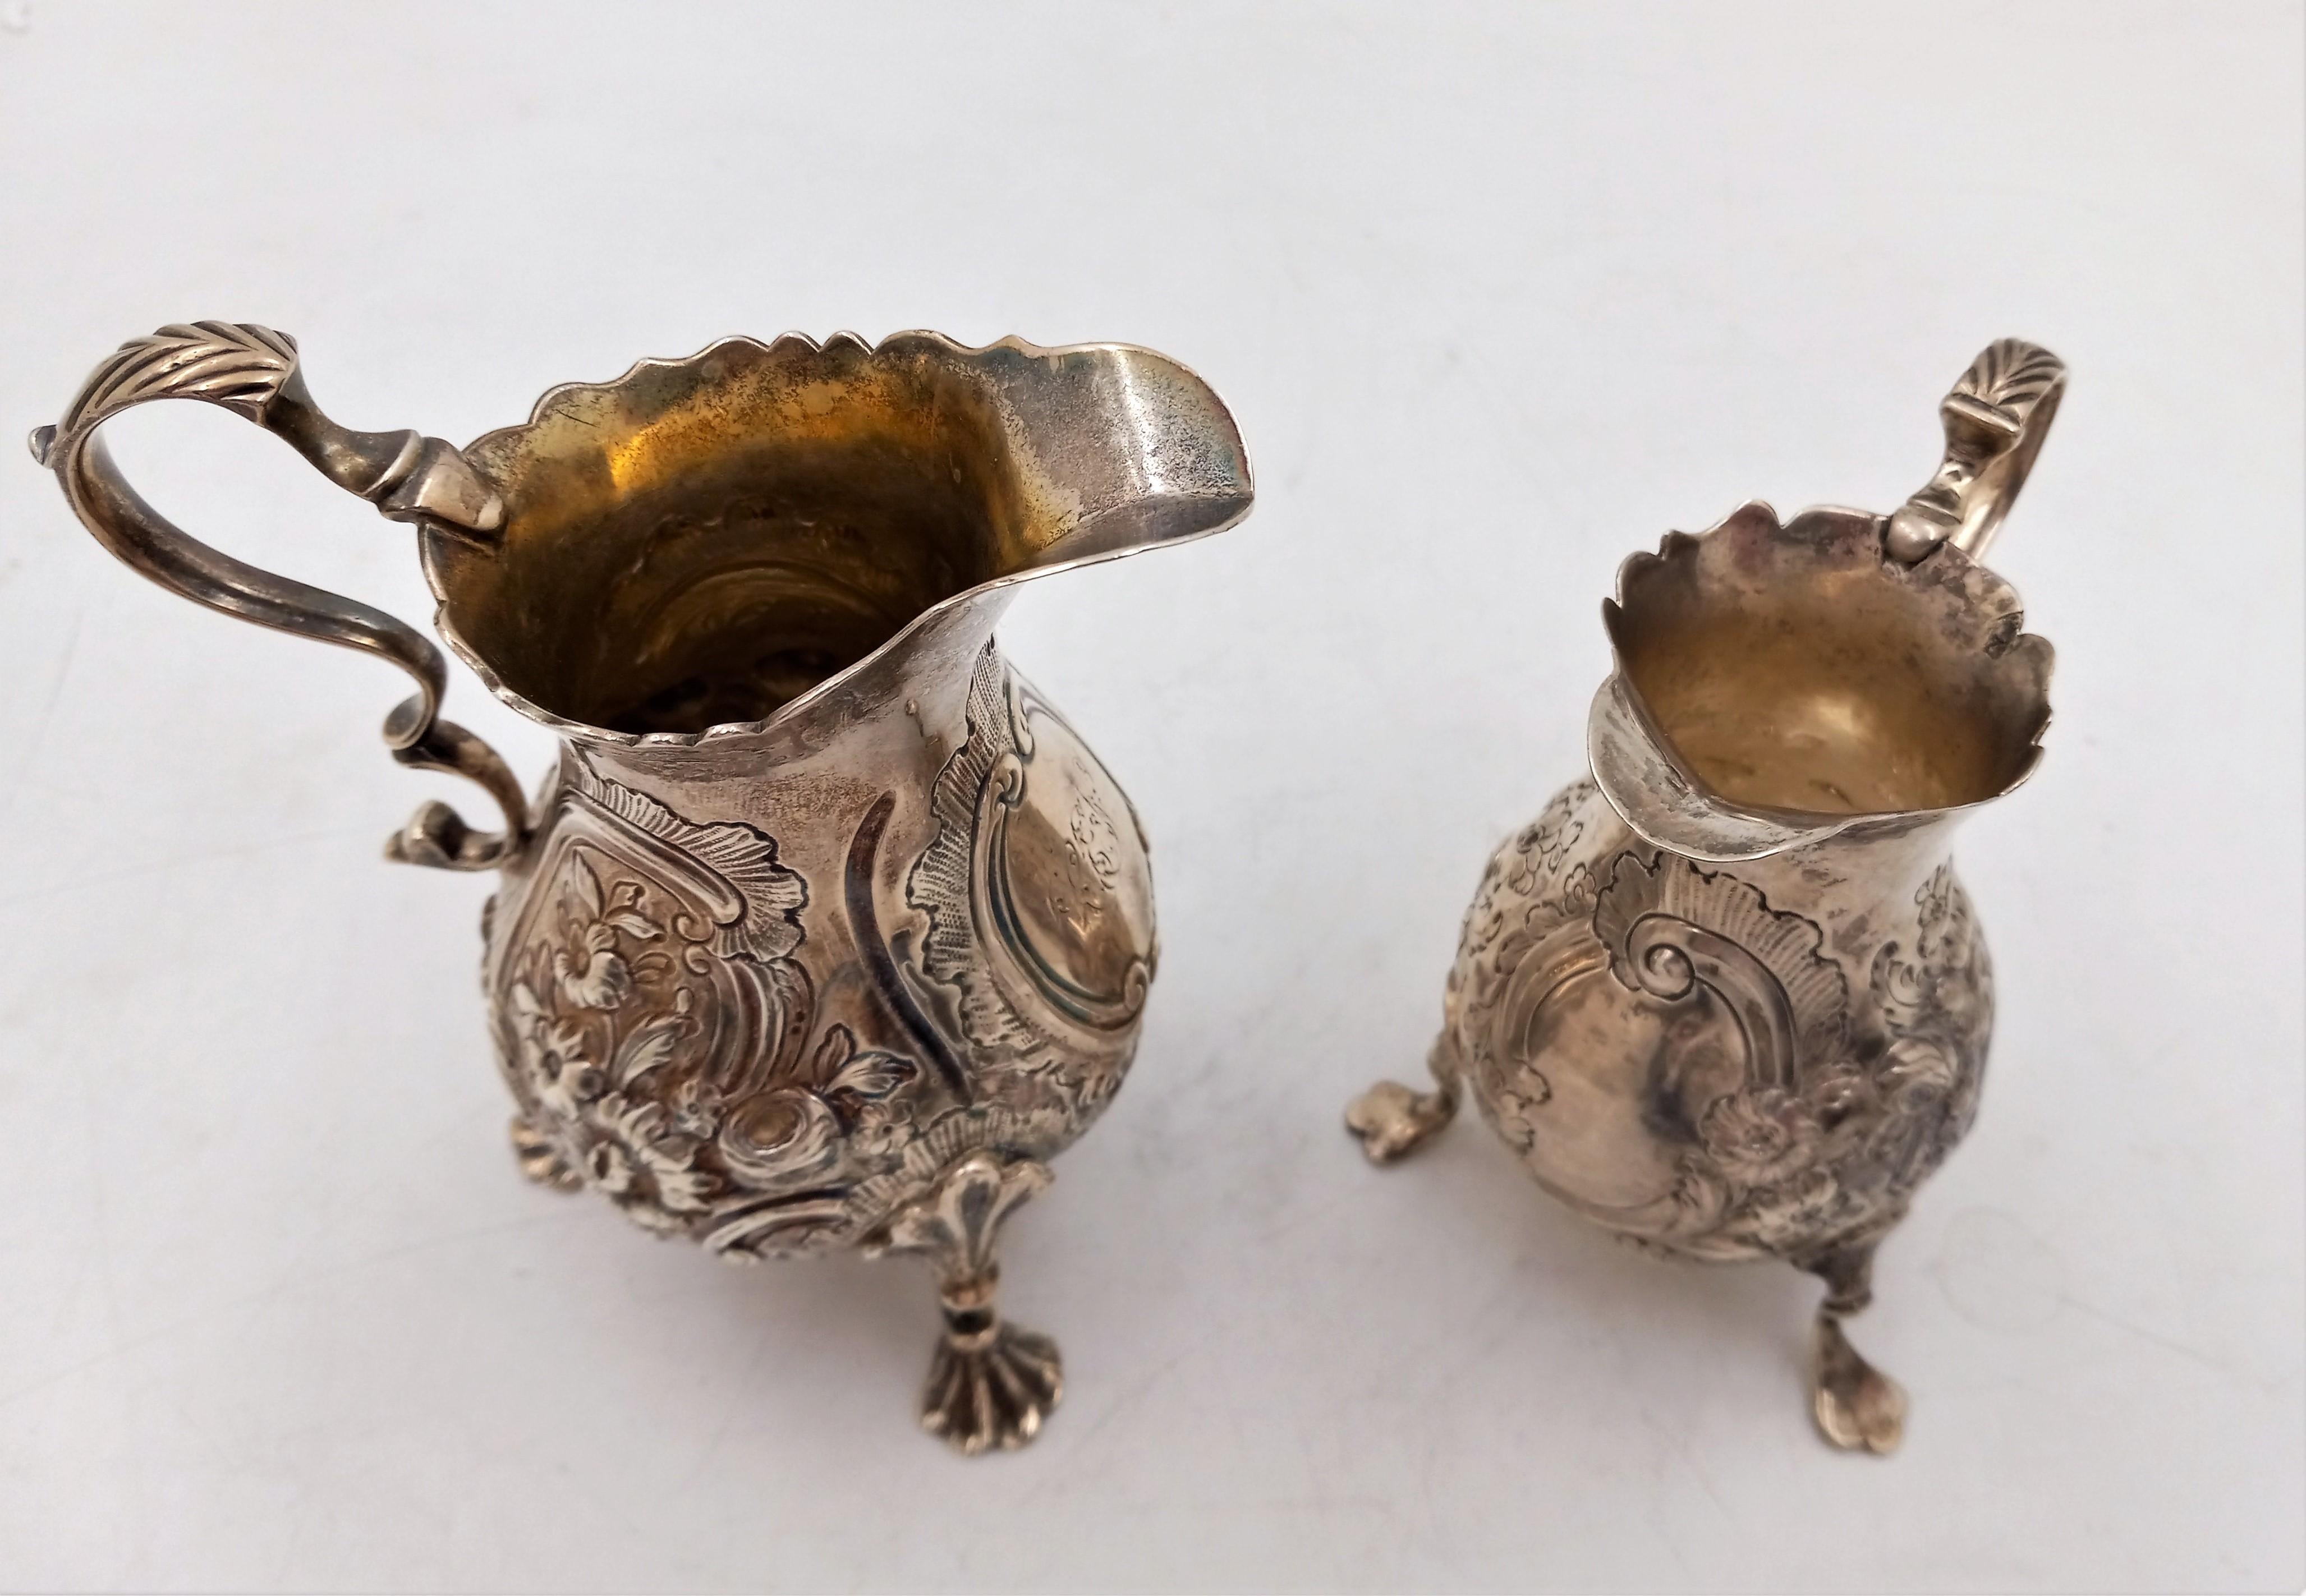 Pair of English Silver Georgian Cream Pitchers standing on shell legs and adorned in a floral pattern, circa mid-1800s. The larger of these two pieces is 4 3/4